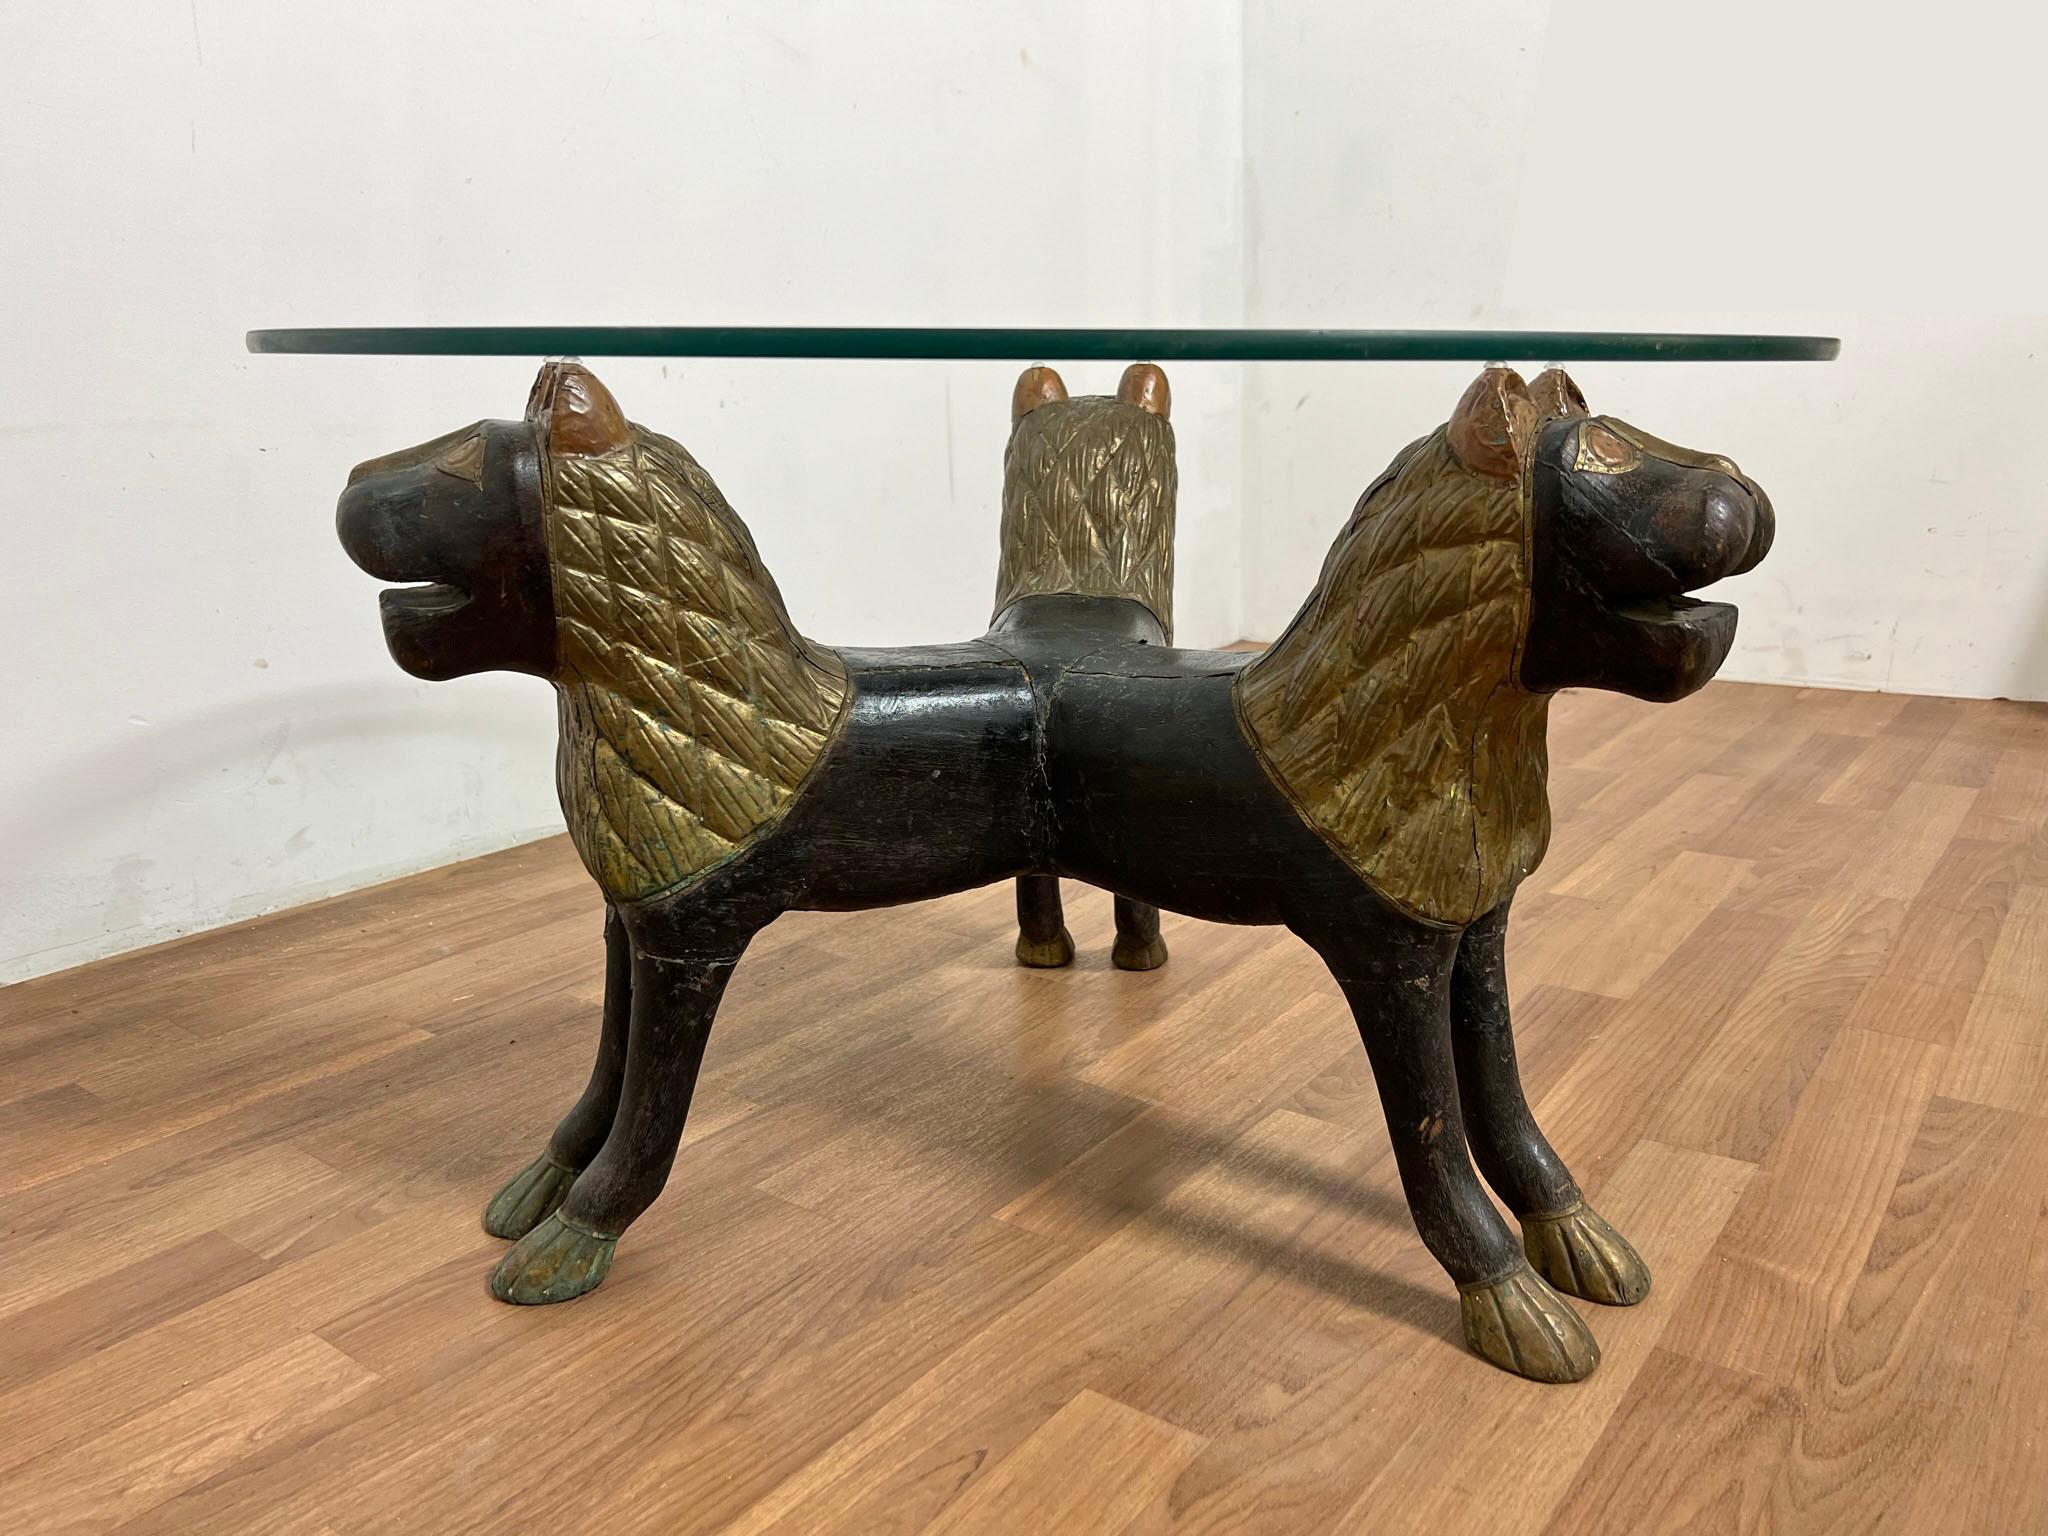 An early 20th century Anglo-Indian cocktail table of three conjoined lions in carved wood with manes and accents of sheet brass and copper in repoussé.